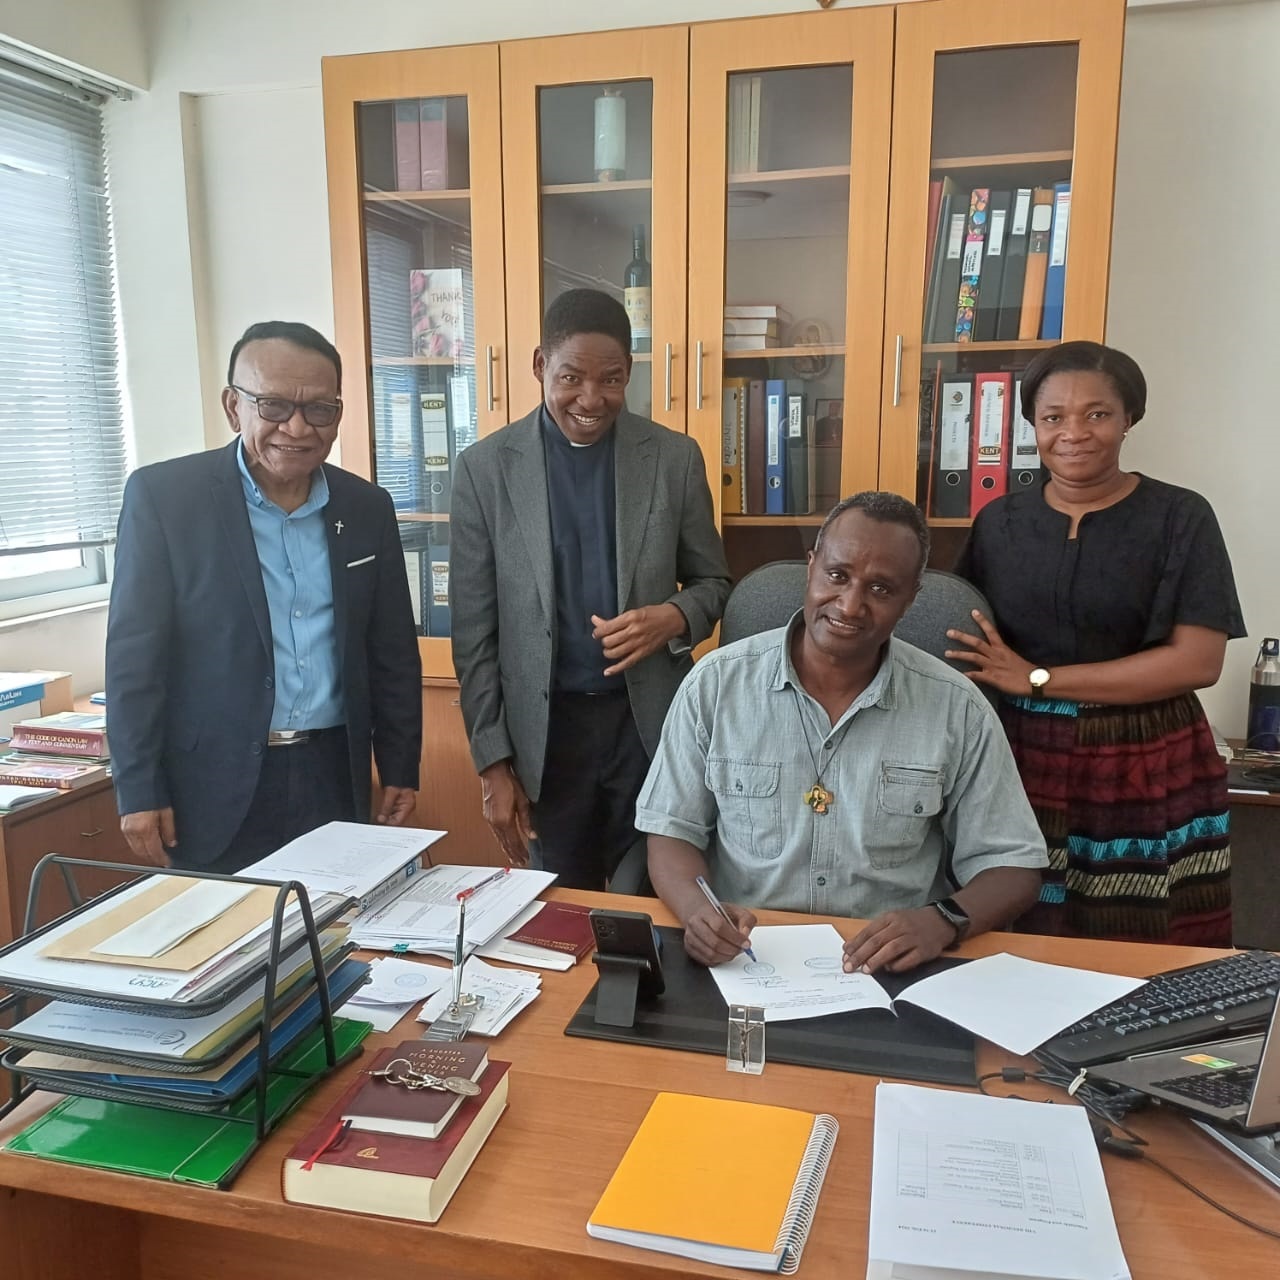 The Major Superior of the Consolata Fathers signing the Memorandum of Understanding with SECAM in the presence of SECAM Management. This M.U. assigned Fr. Stephen Okello, a consolate Priest, as a Liaison Officer for SECAM-AU office in Addis Ababa.